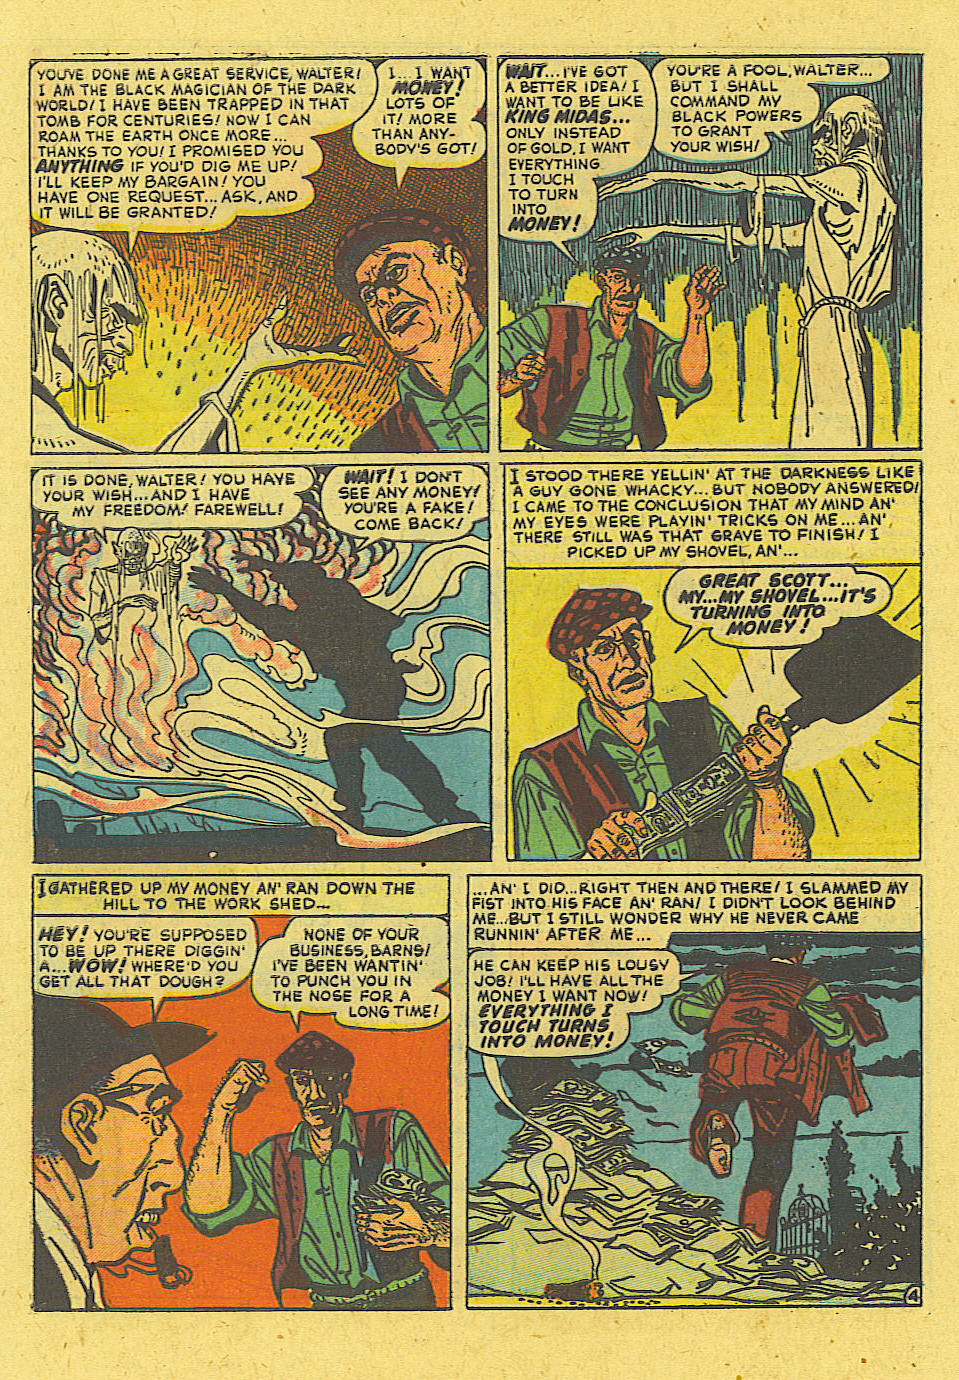 Marvel Tales (1949) 103 Page 4